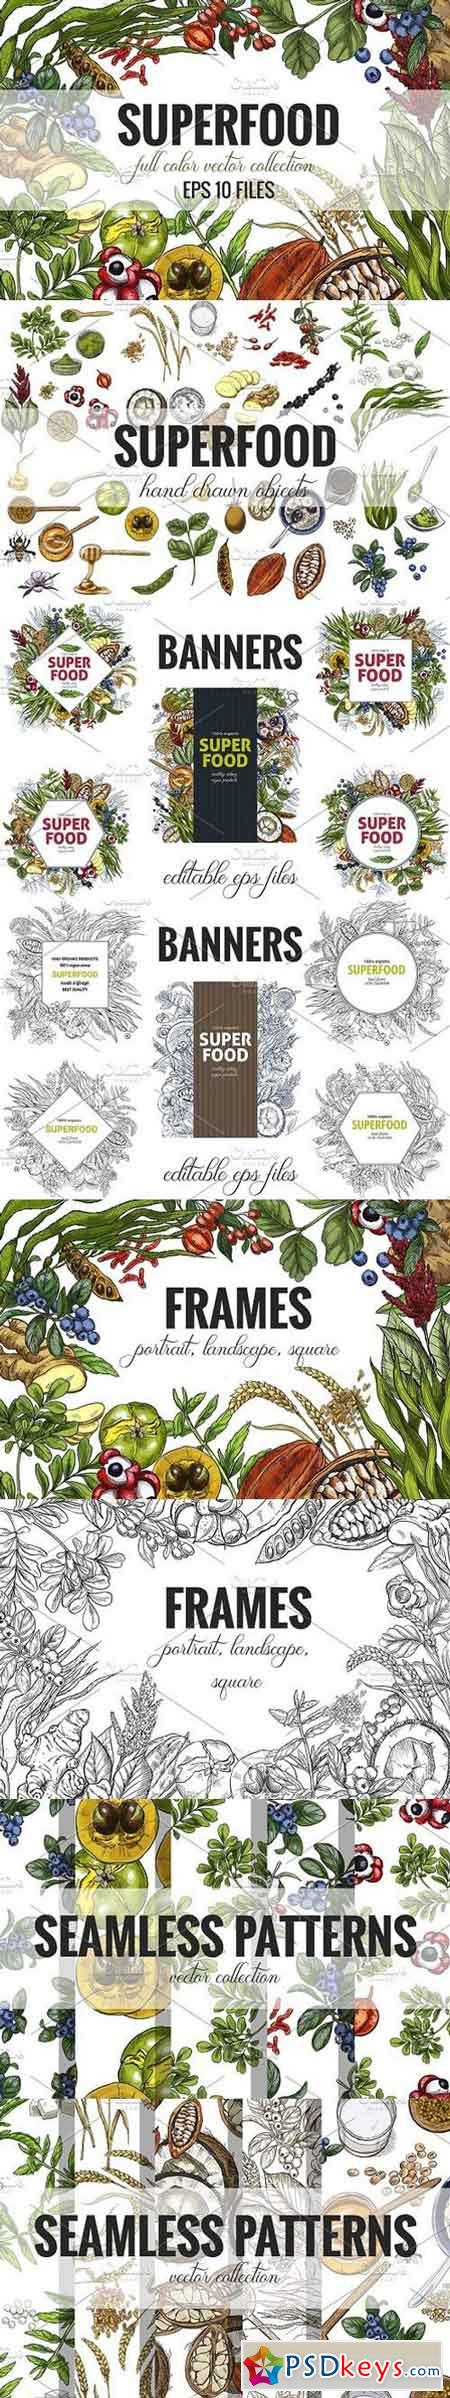 Superfood, vector collection 1730152